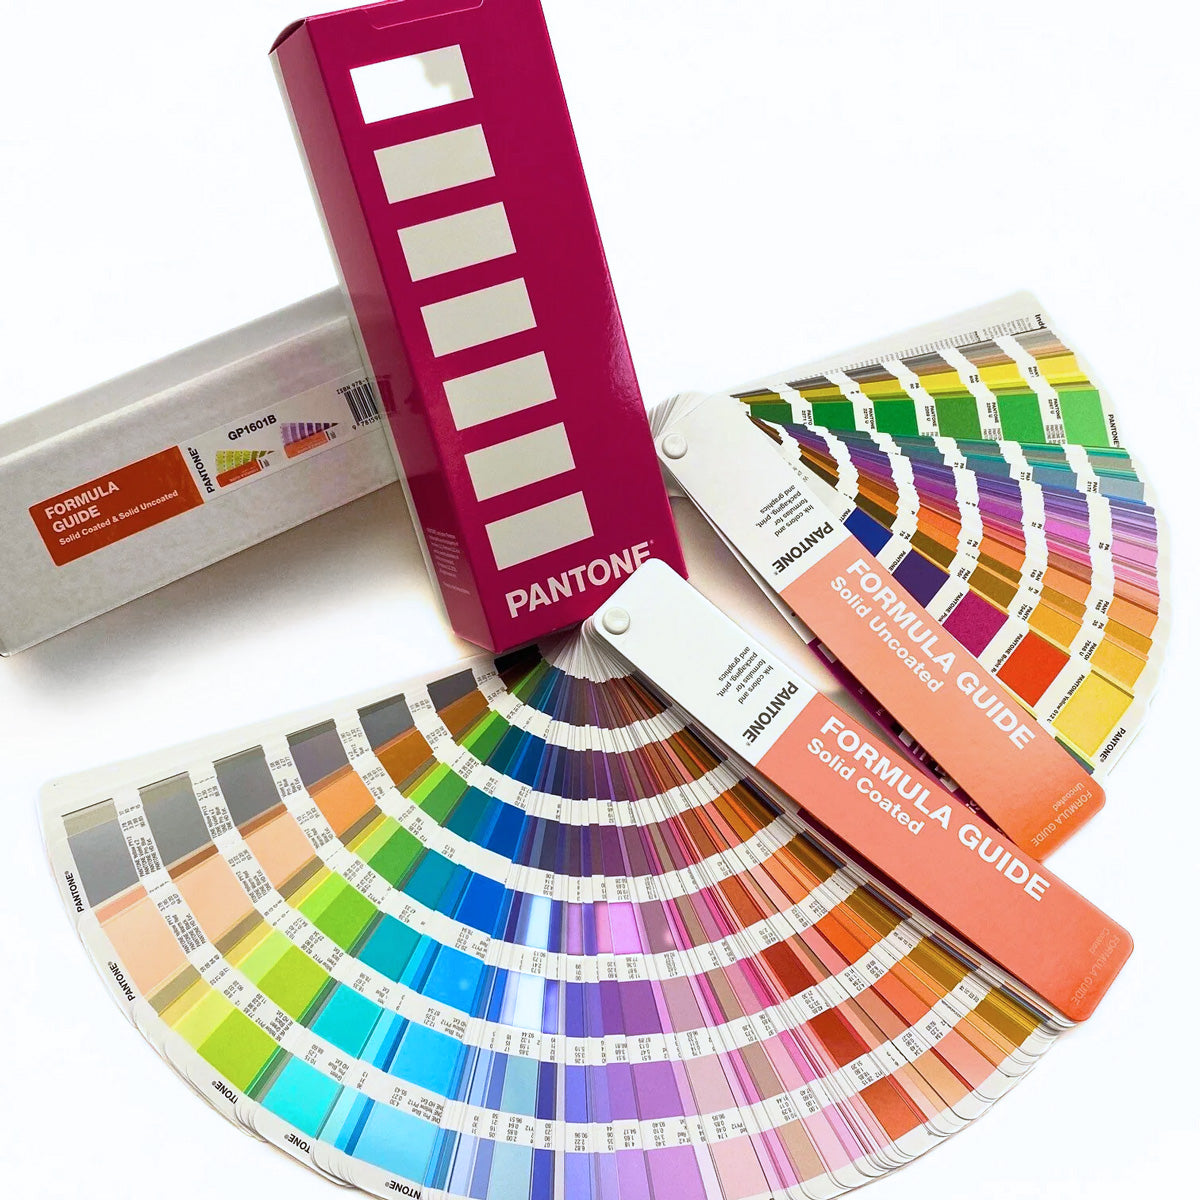  Pantone Formula Guide, Coated & Uncoated Ultimate Color  Matching Tool to Communicate Color in Graphics and Print